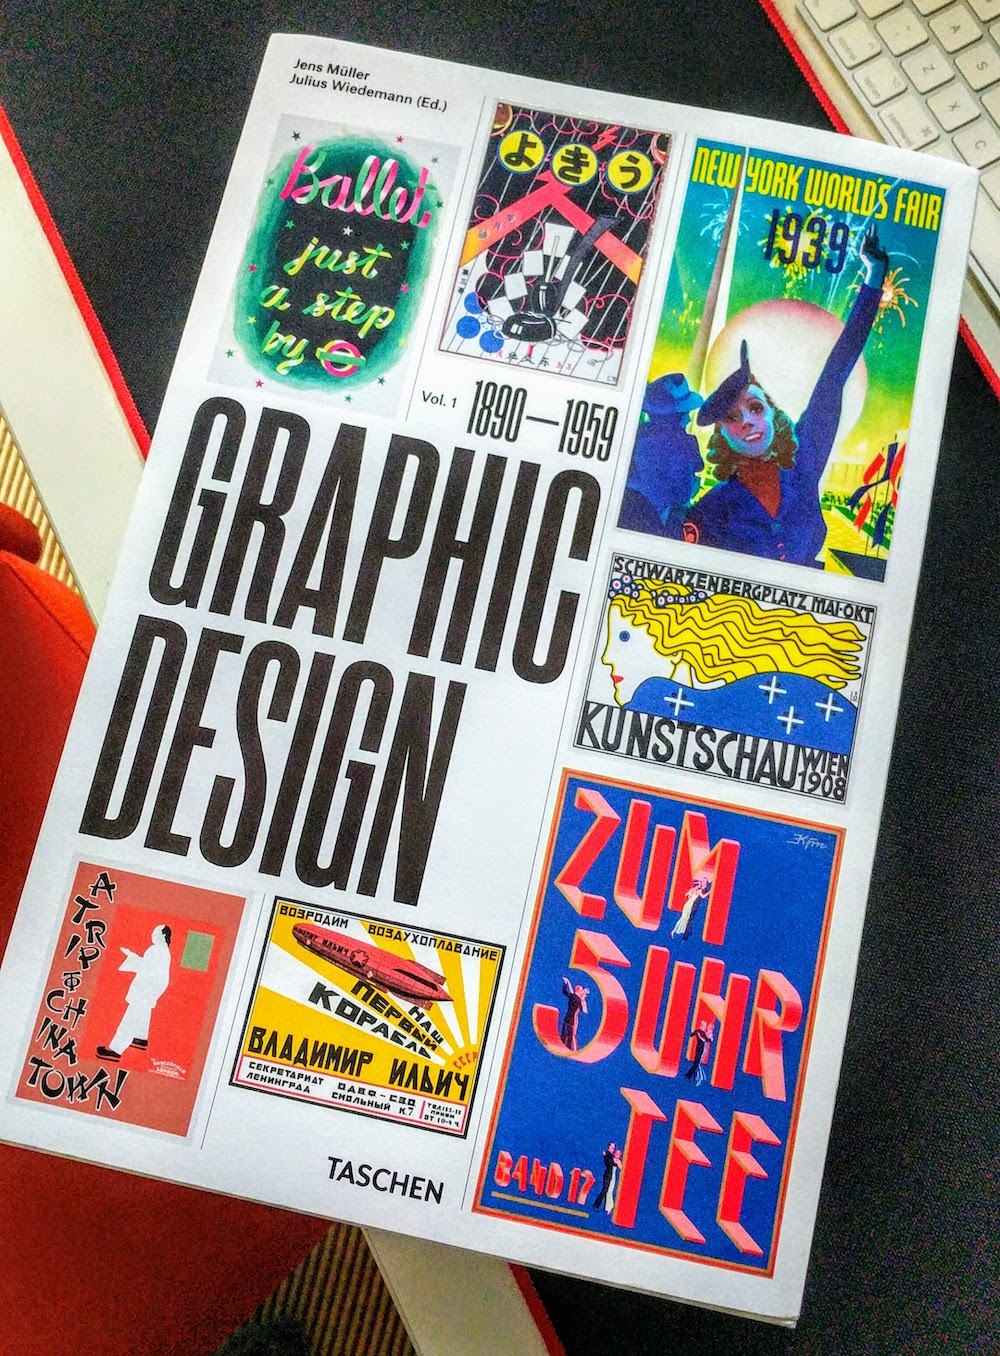 The History of Graphic Design Volume 1